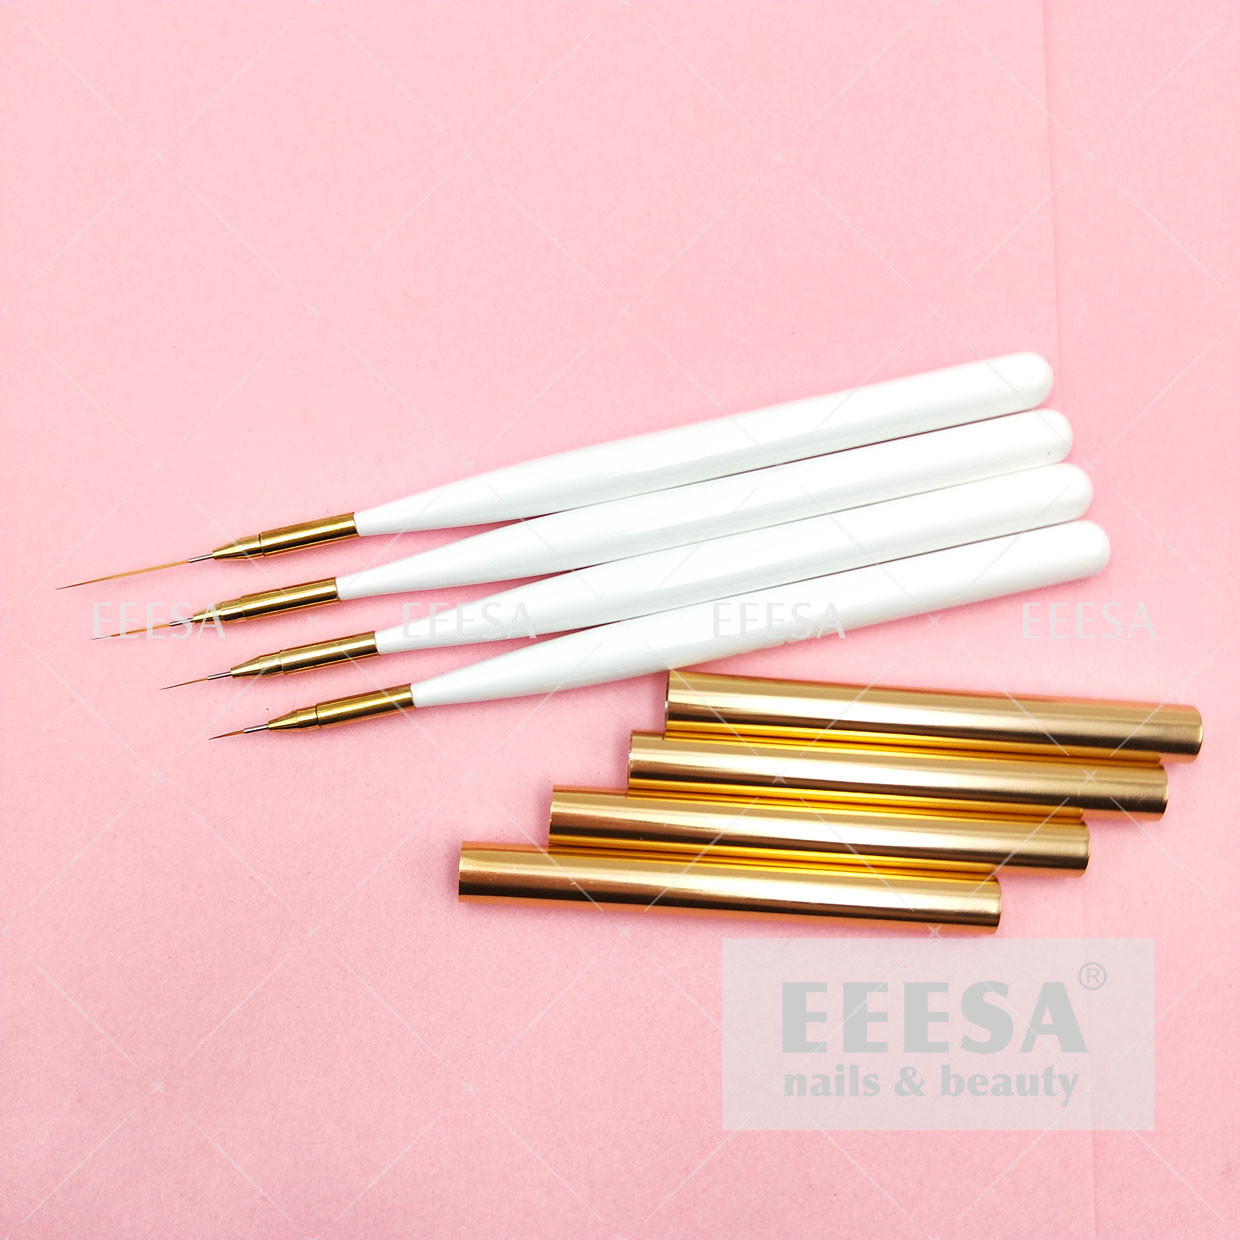  5 7 12 20Mm In White Wooden Handle Rose Gold Lid Nail Art Striper Detail Liner Brushes Set Manufactures